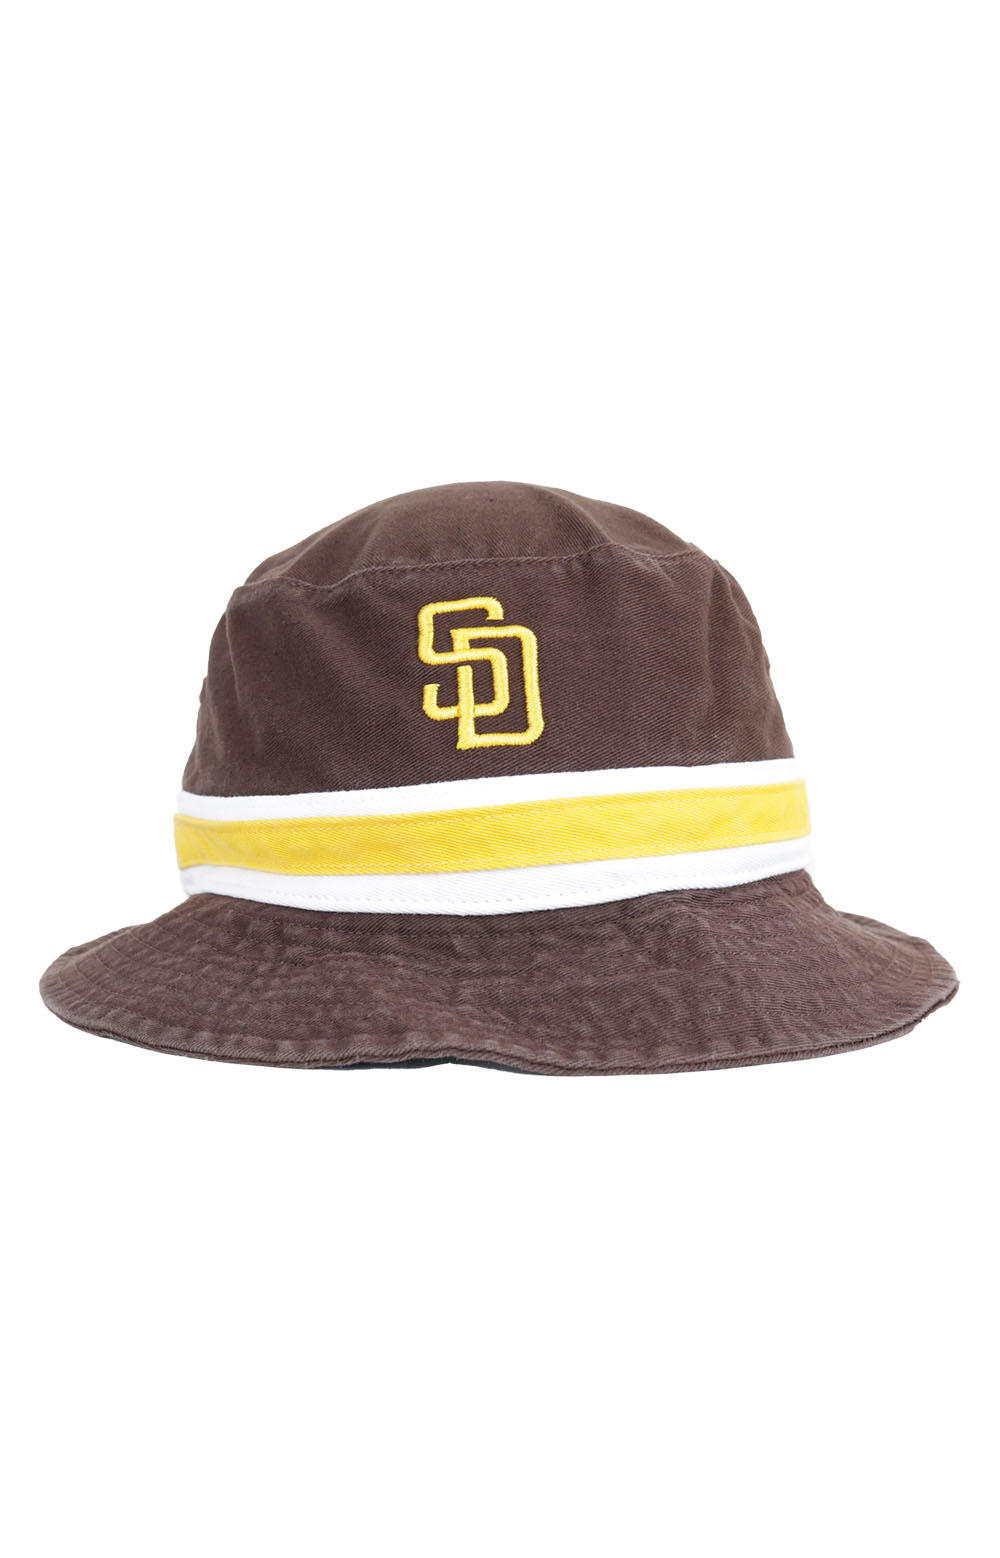 47 Brand, SD Padres Striped Bucket Hat - Brown